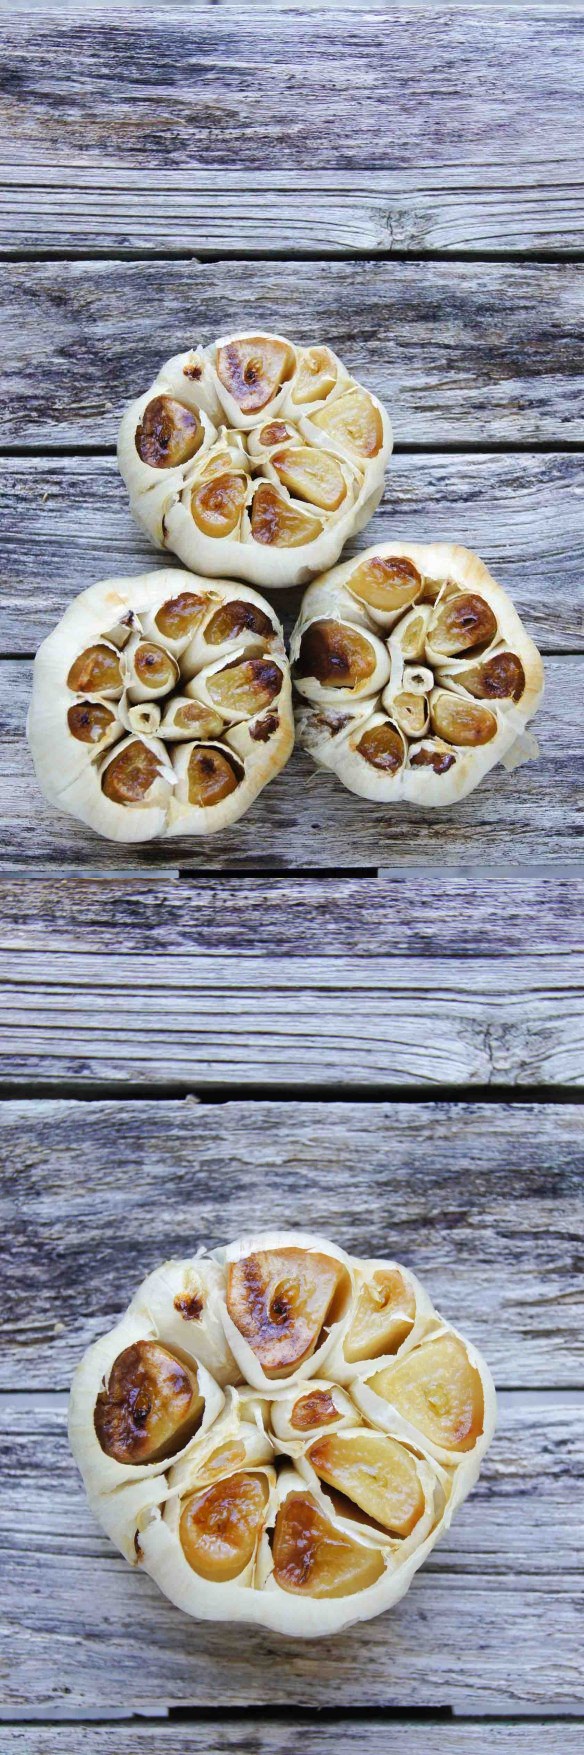 How to roast garlic and stay healthy all year